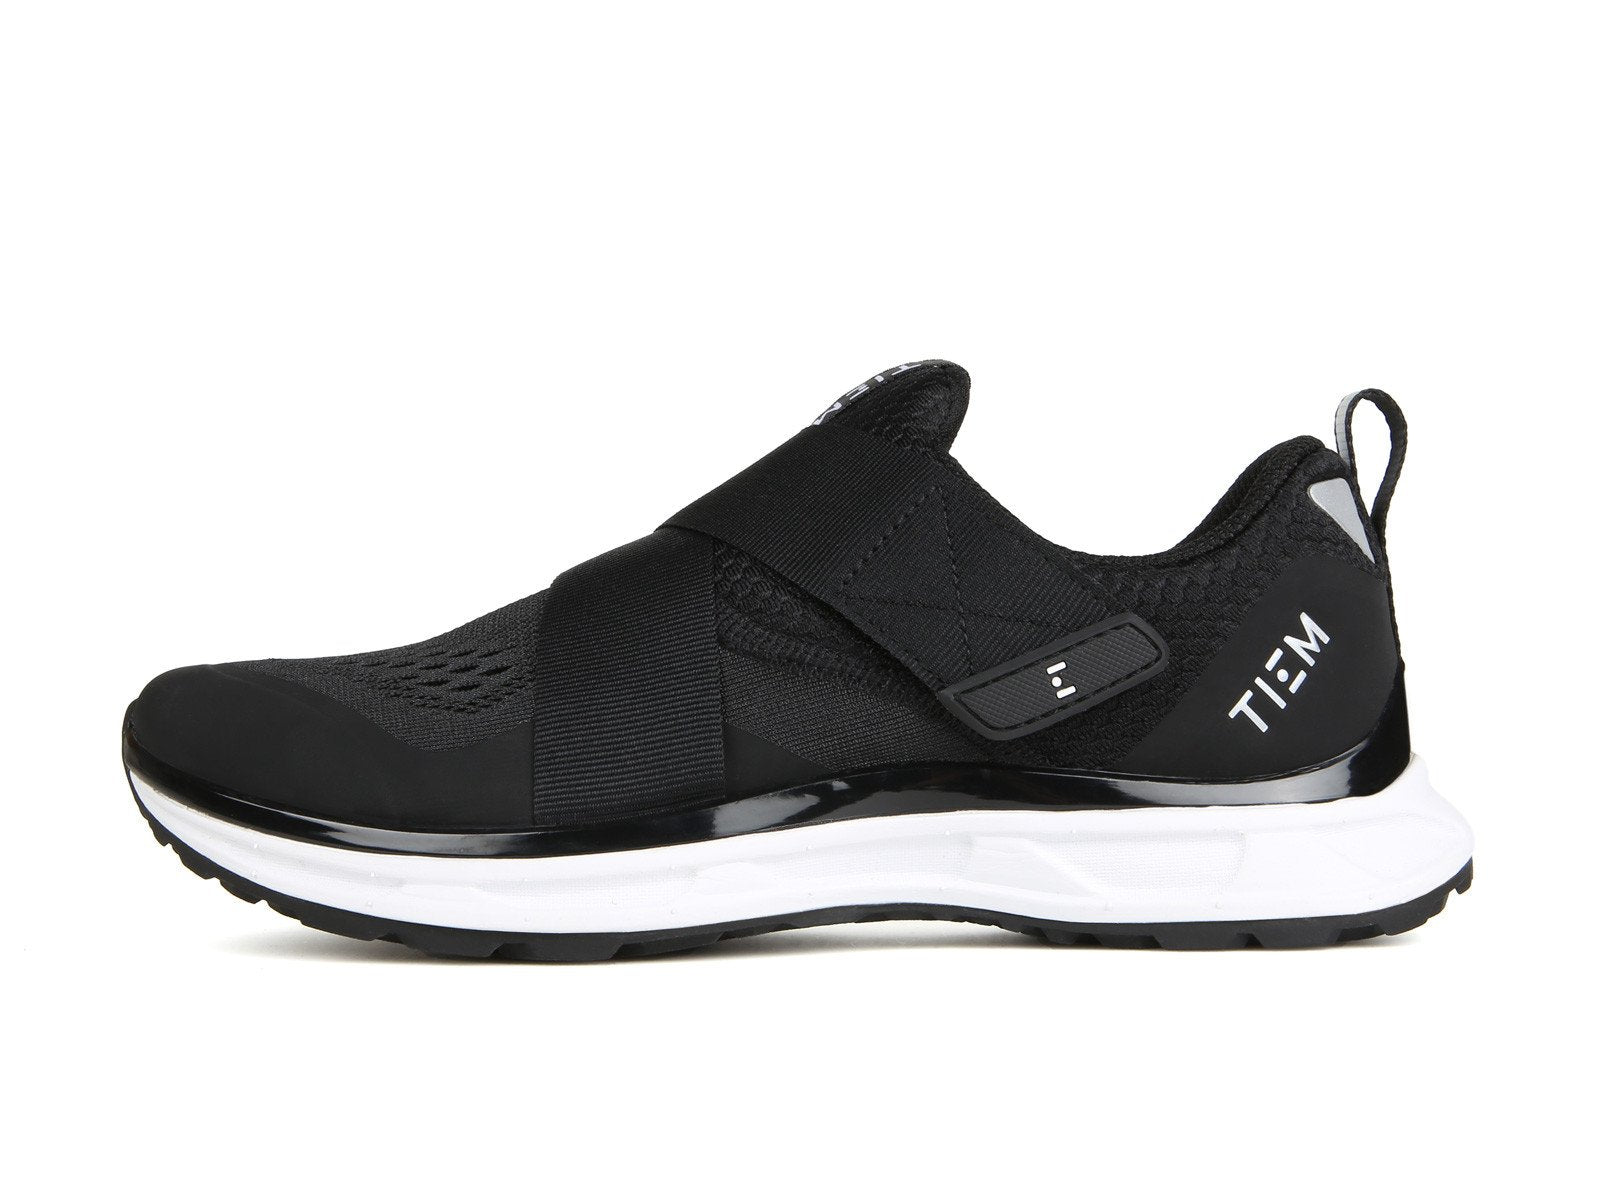 TIEM Slipstream Cycling Shoes with SPD Clips (IN STUDIO PICK UP ONLY)